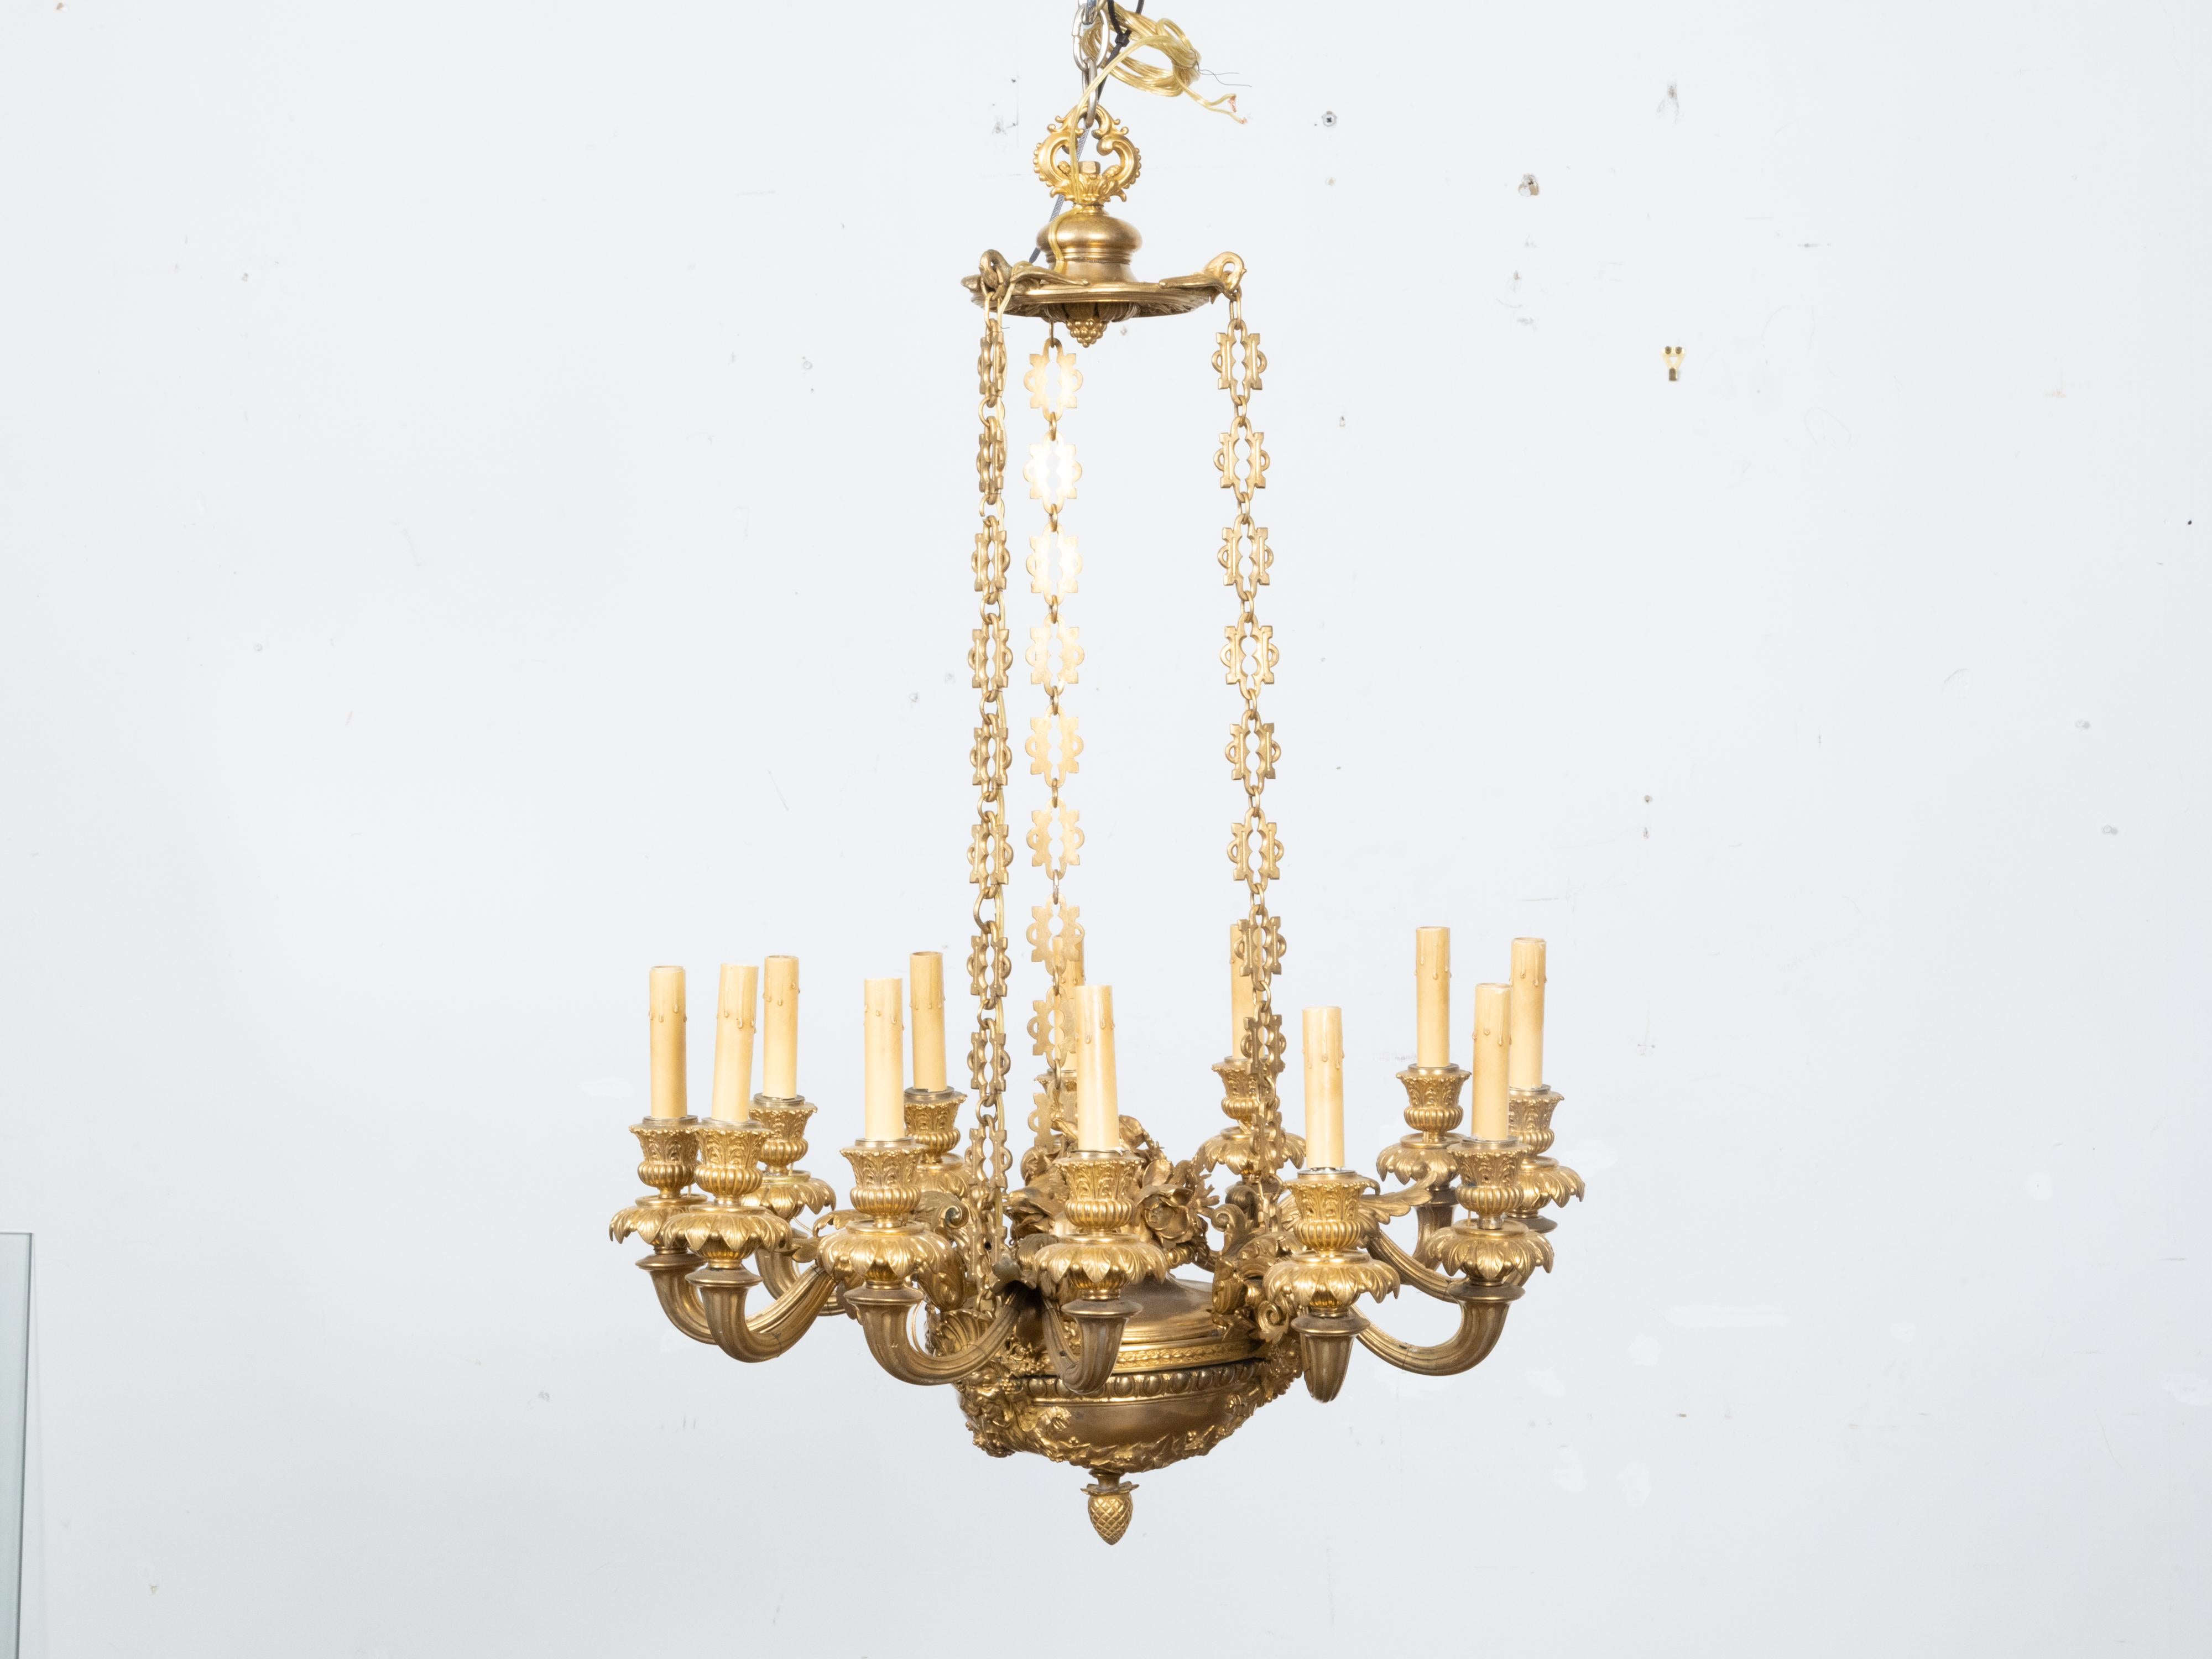 A French Napoléon III gilt bronze 12-light chandelier from the second half of the 19th century, with scrolling arms and abundant foliage motif. Embellish your space with the sublime grandeur of this French Napoléon III gilt bronze 12-light